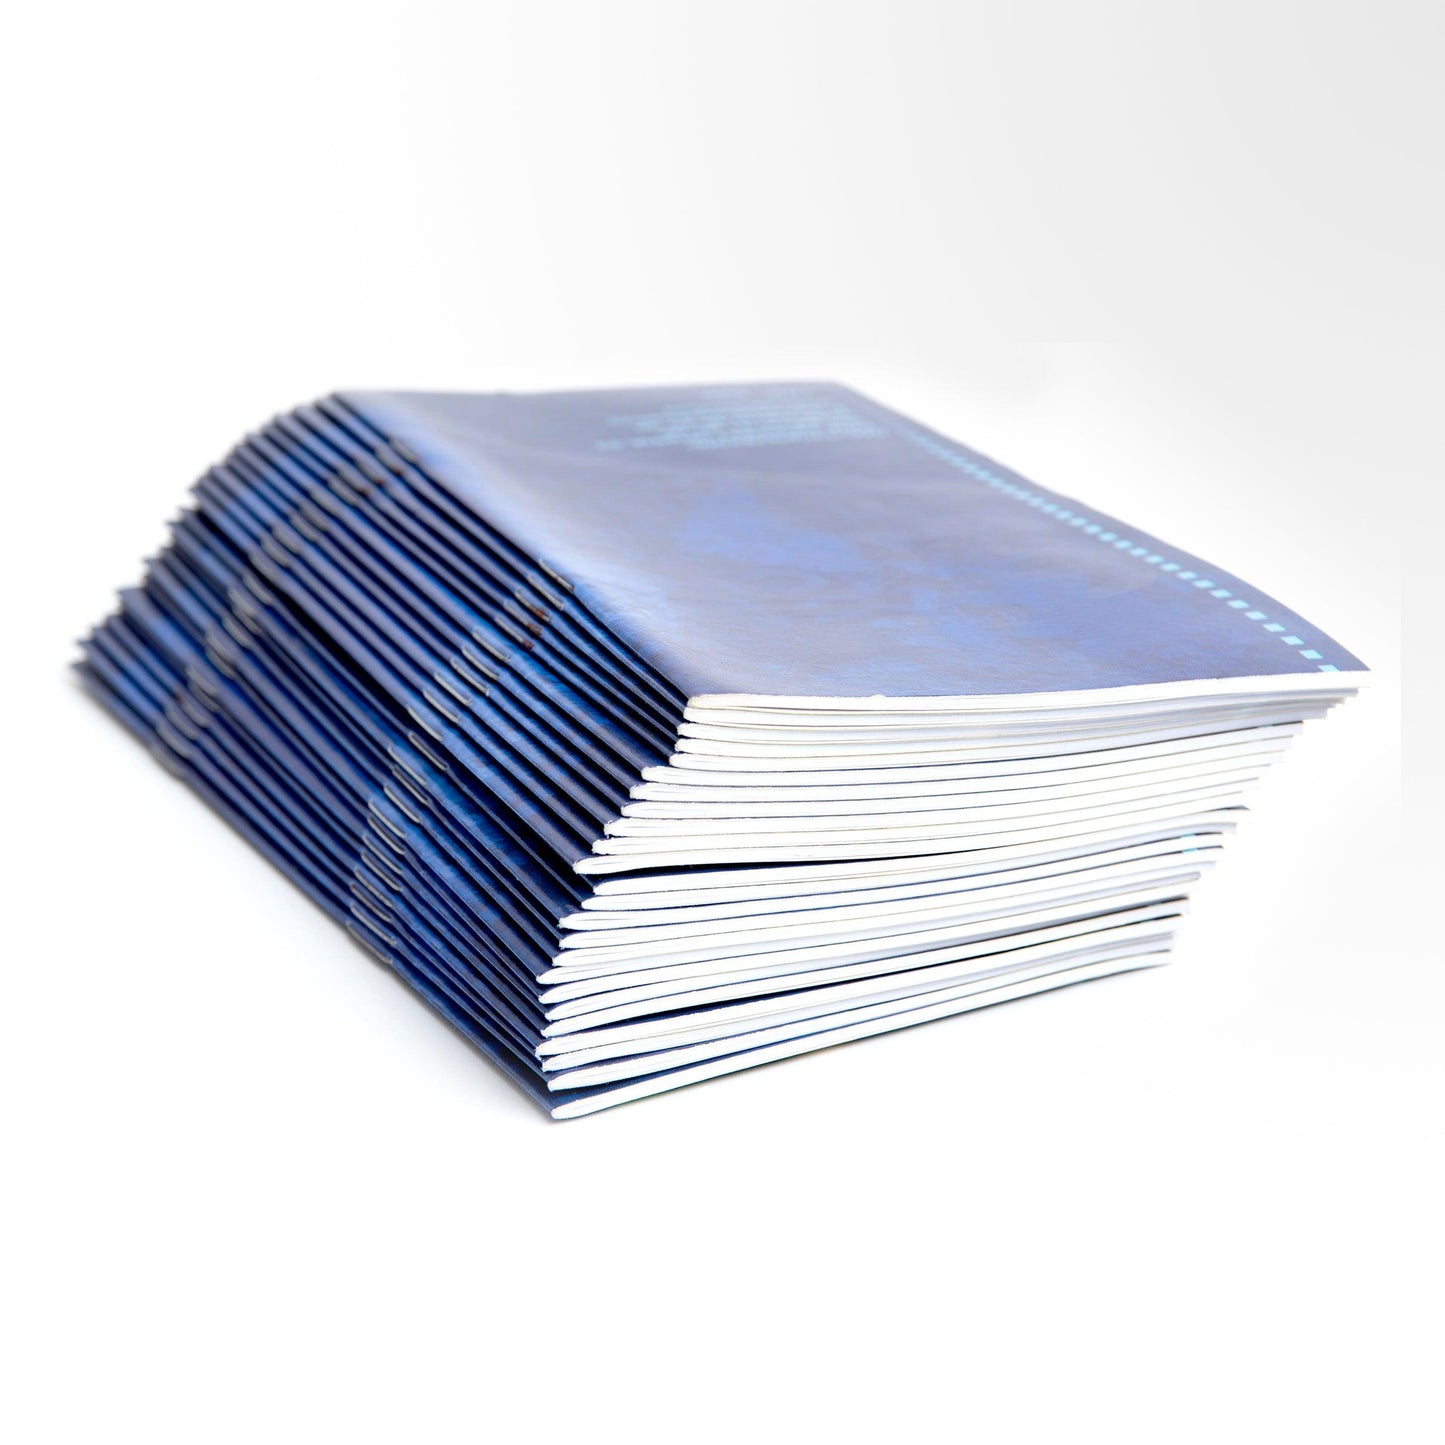 8.5"x 11" Booklets - Self Cover / Saddle Stitch Binding.